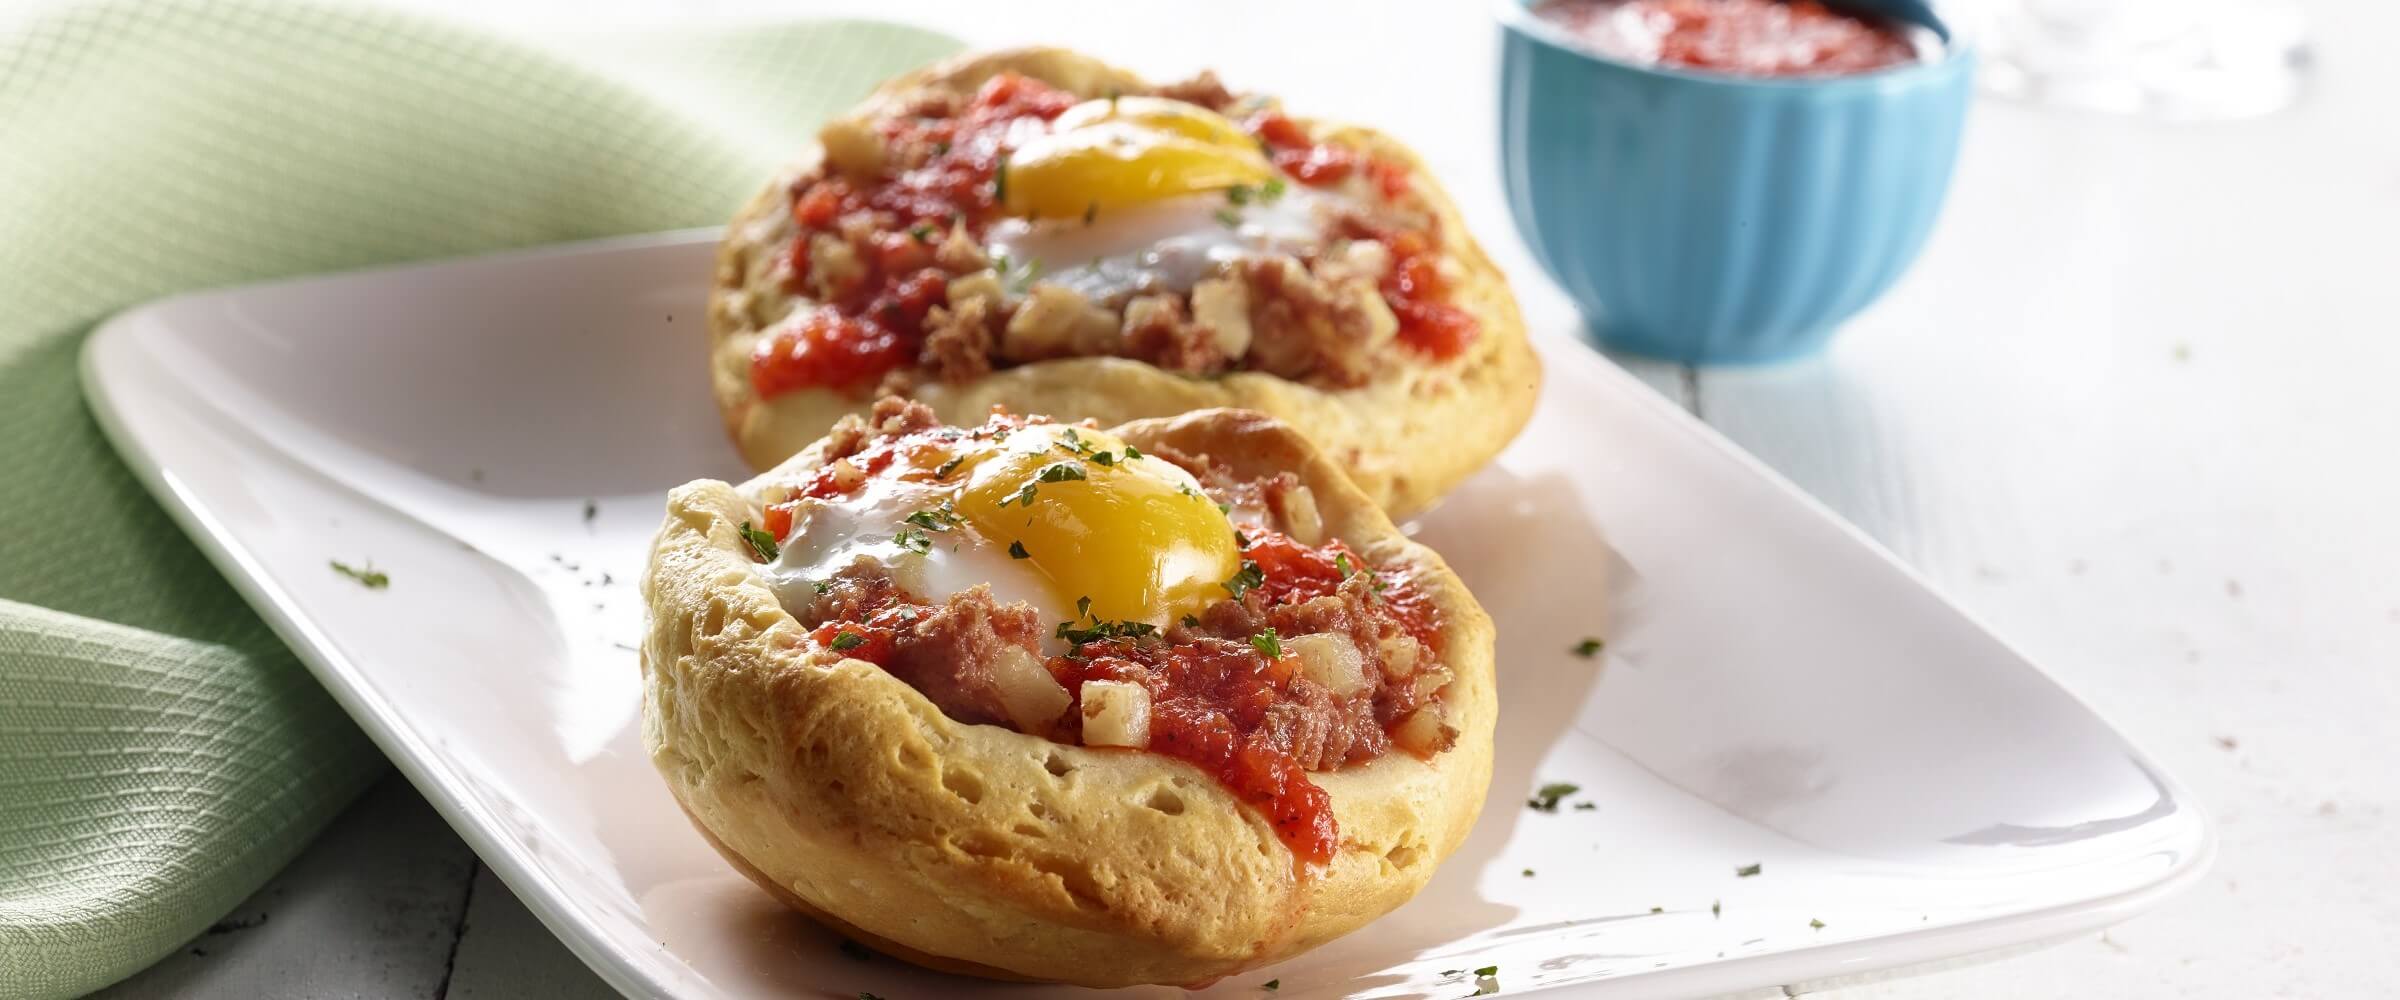 Corned beef hash breakfast cups on white plate with green napkin